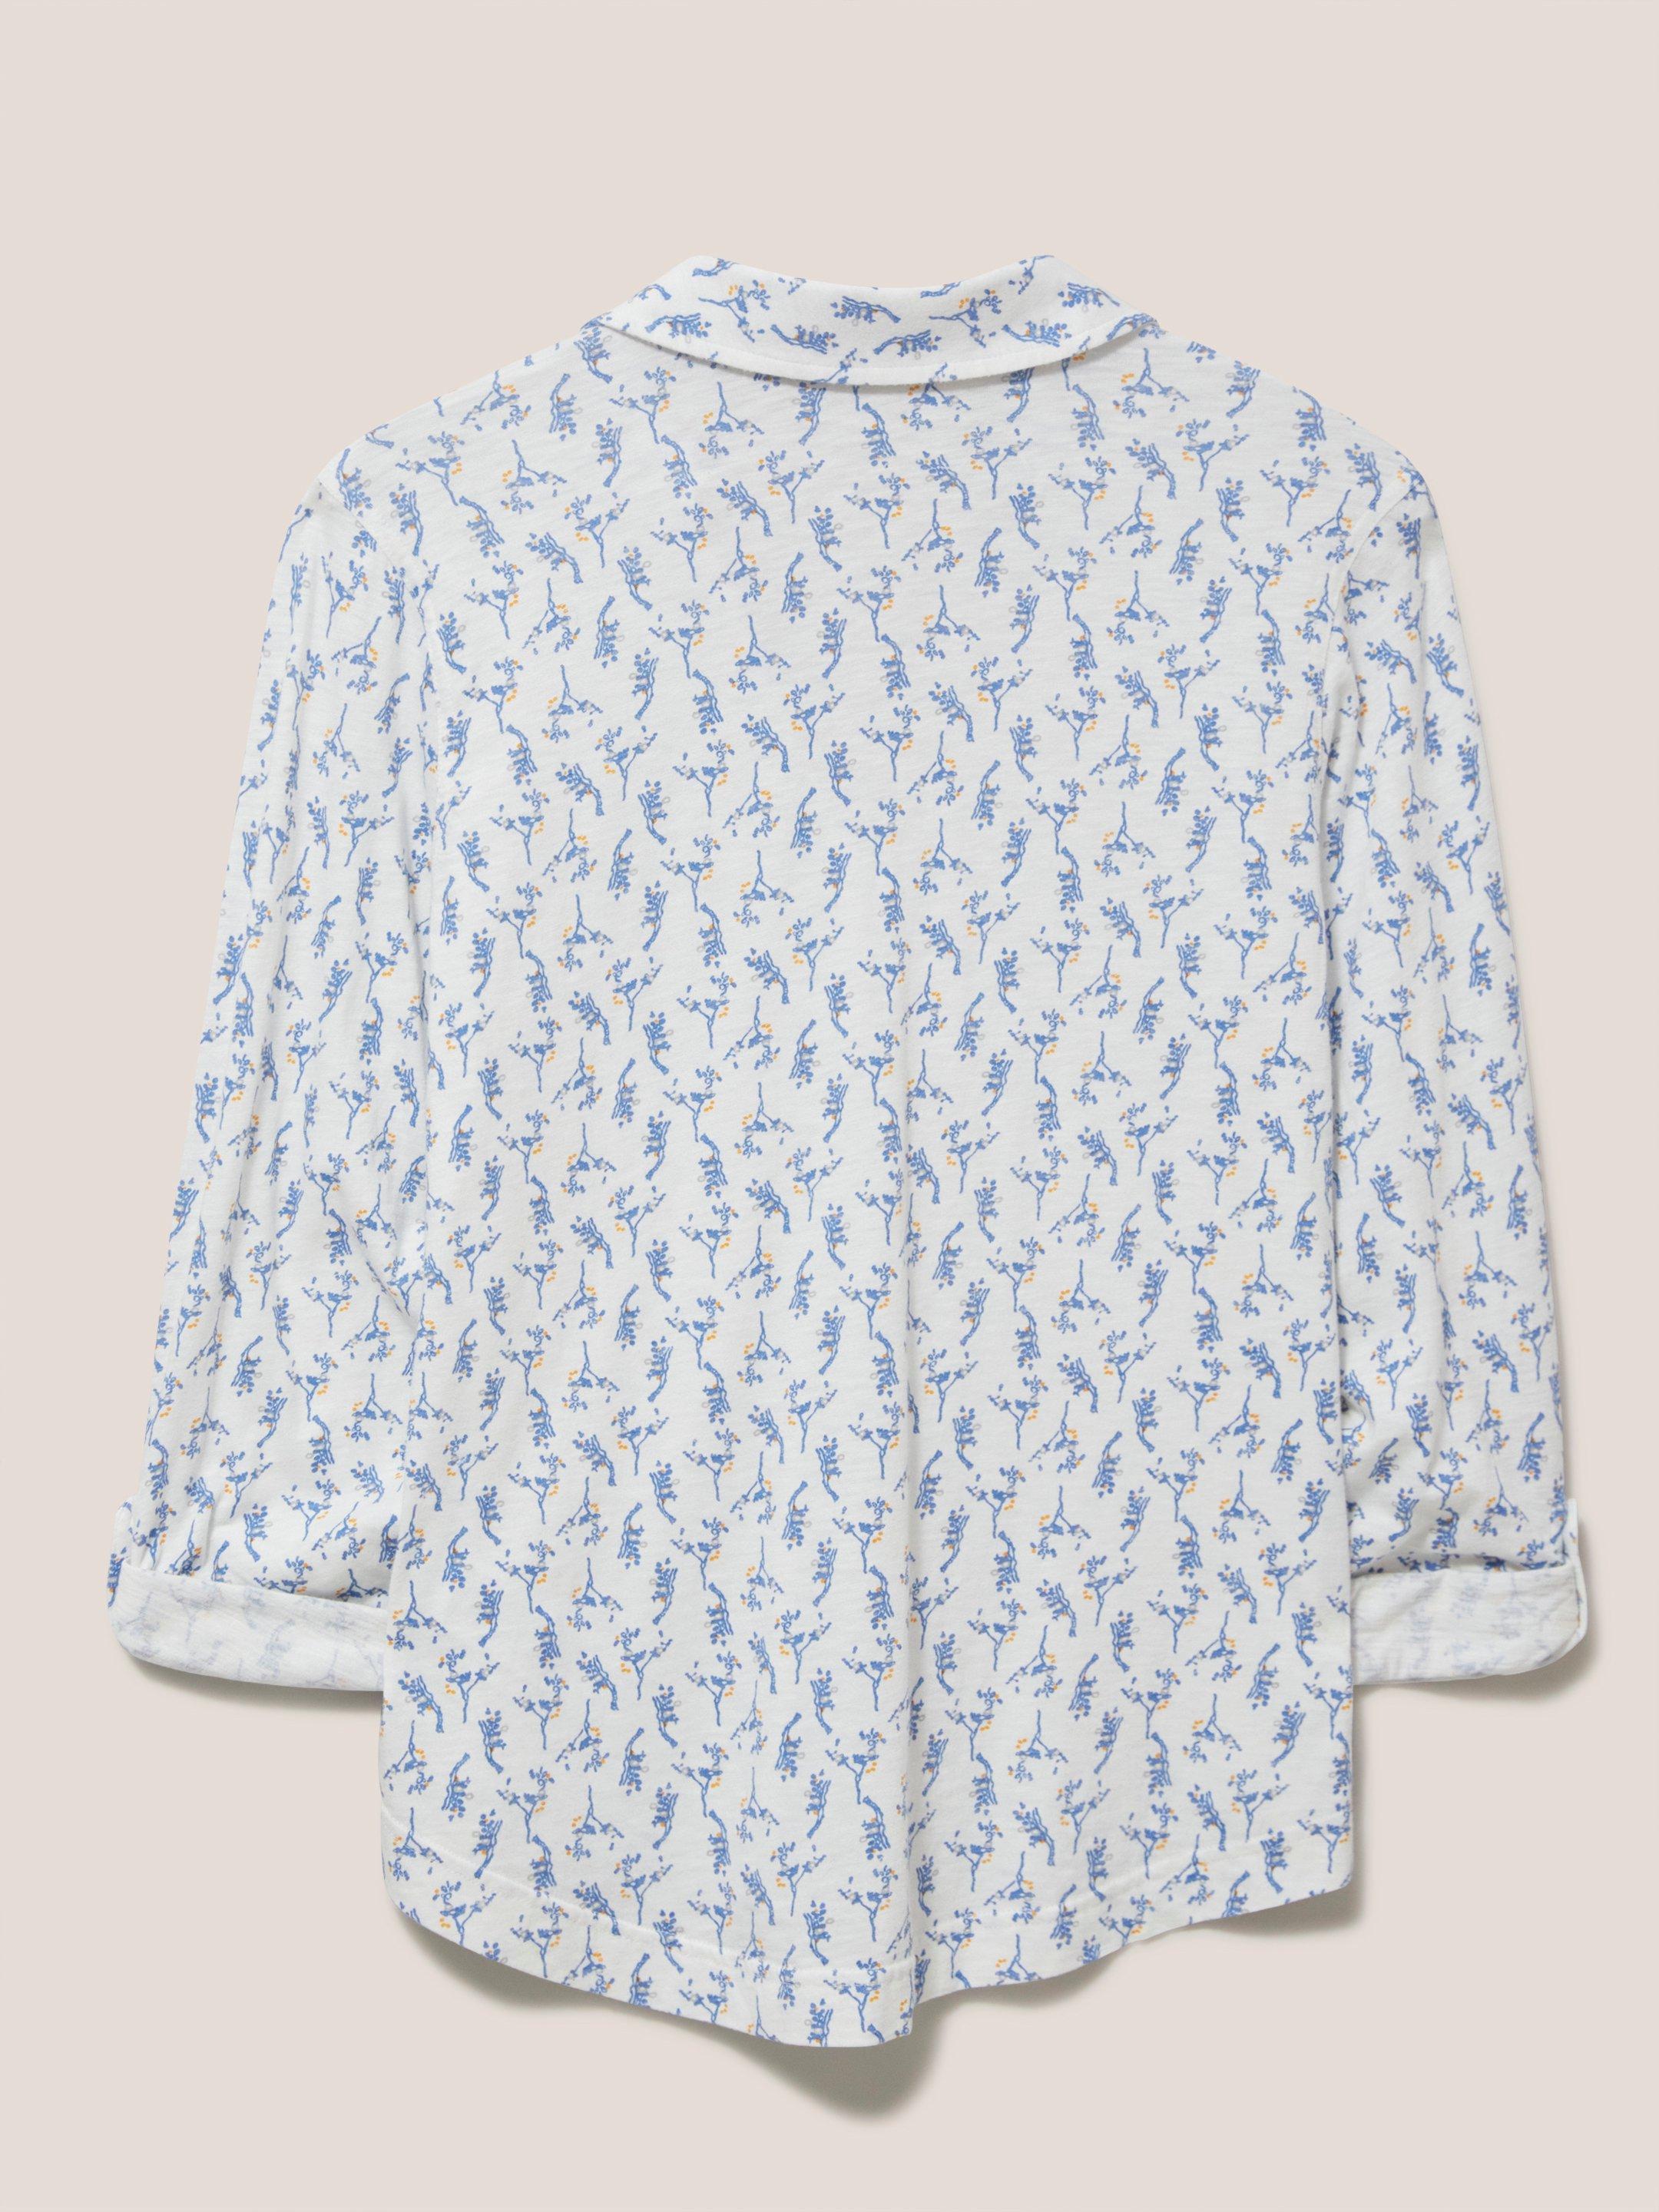 Annie Jersey Printed Shirt in WHITE MLT - FLAT BACK